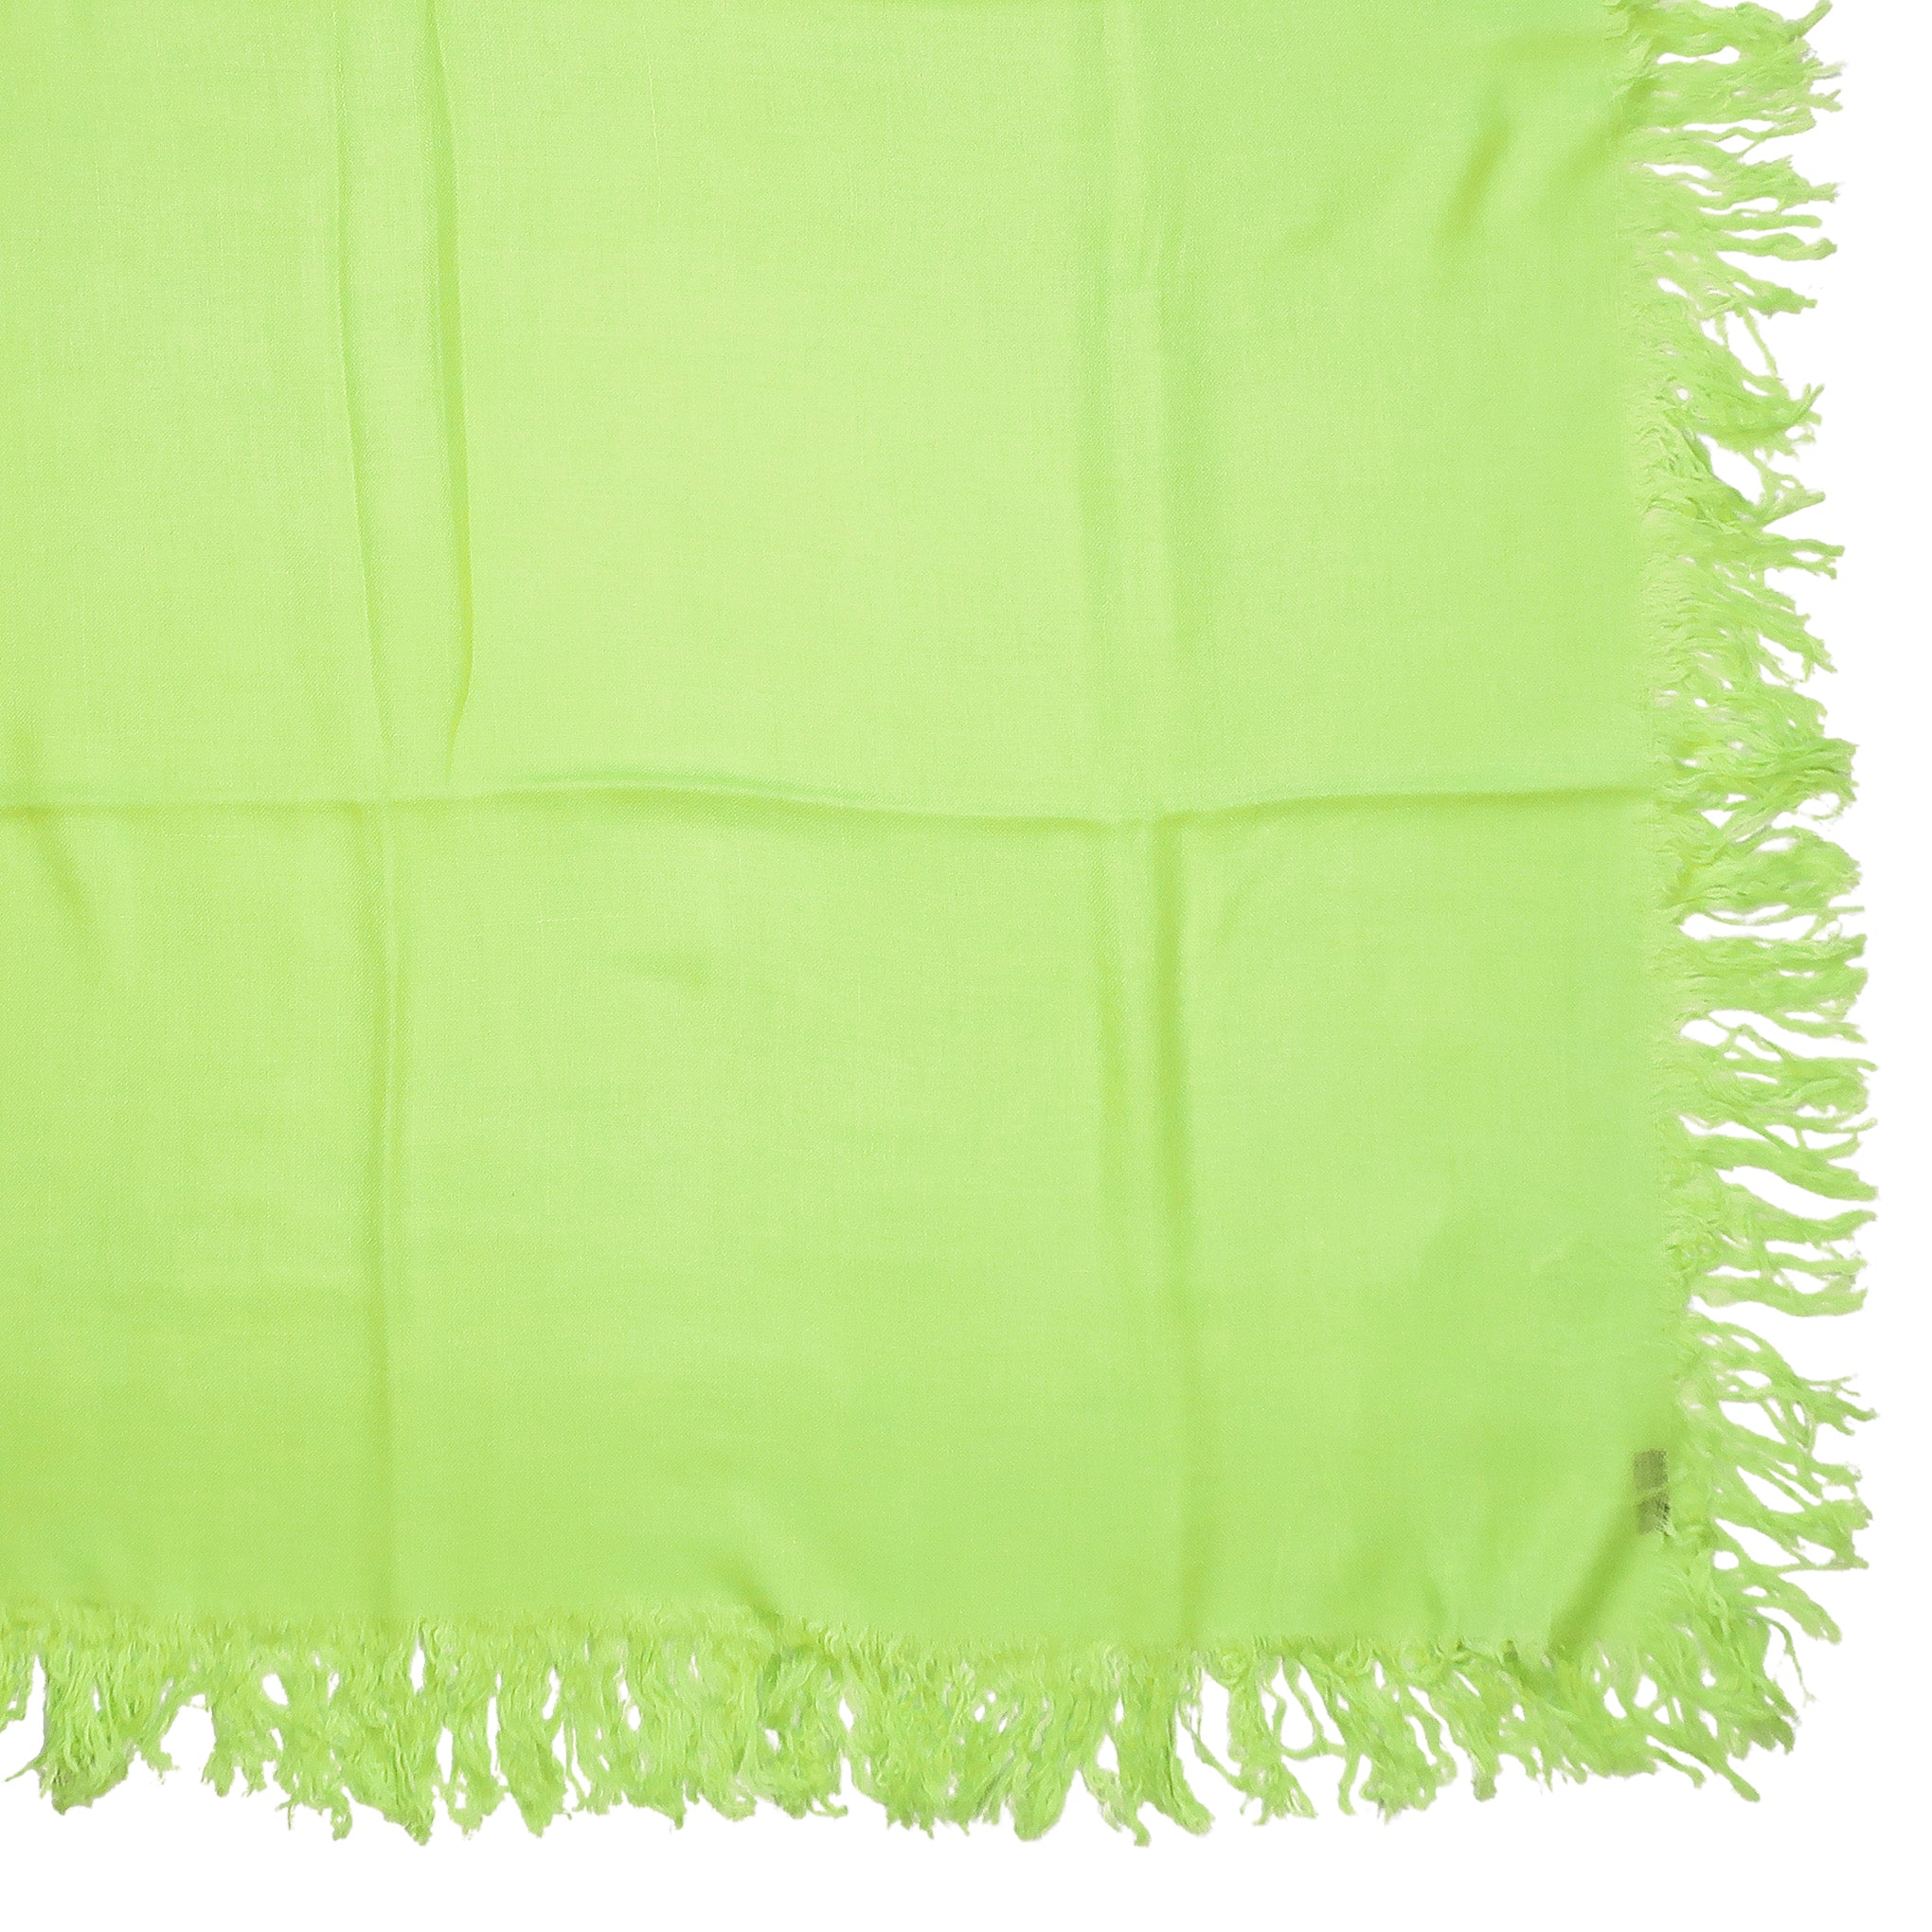 Blue Pacific Tissue Solid Modal and Cashmere Scarf Shawl in Lime Green